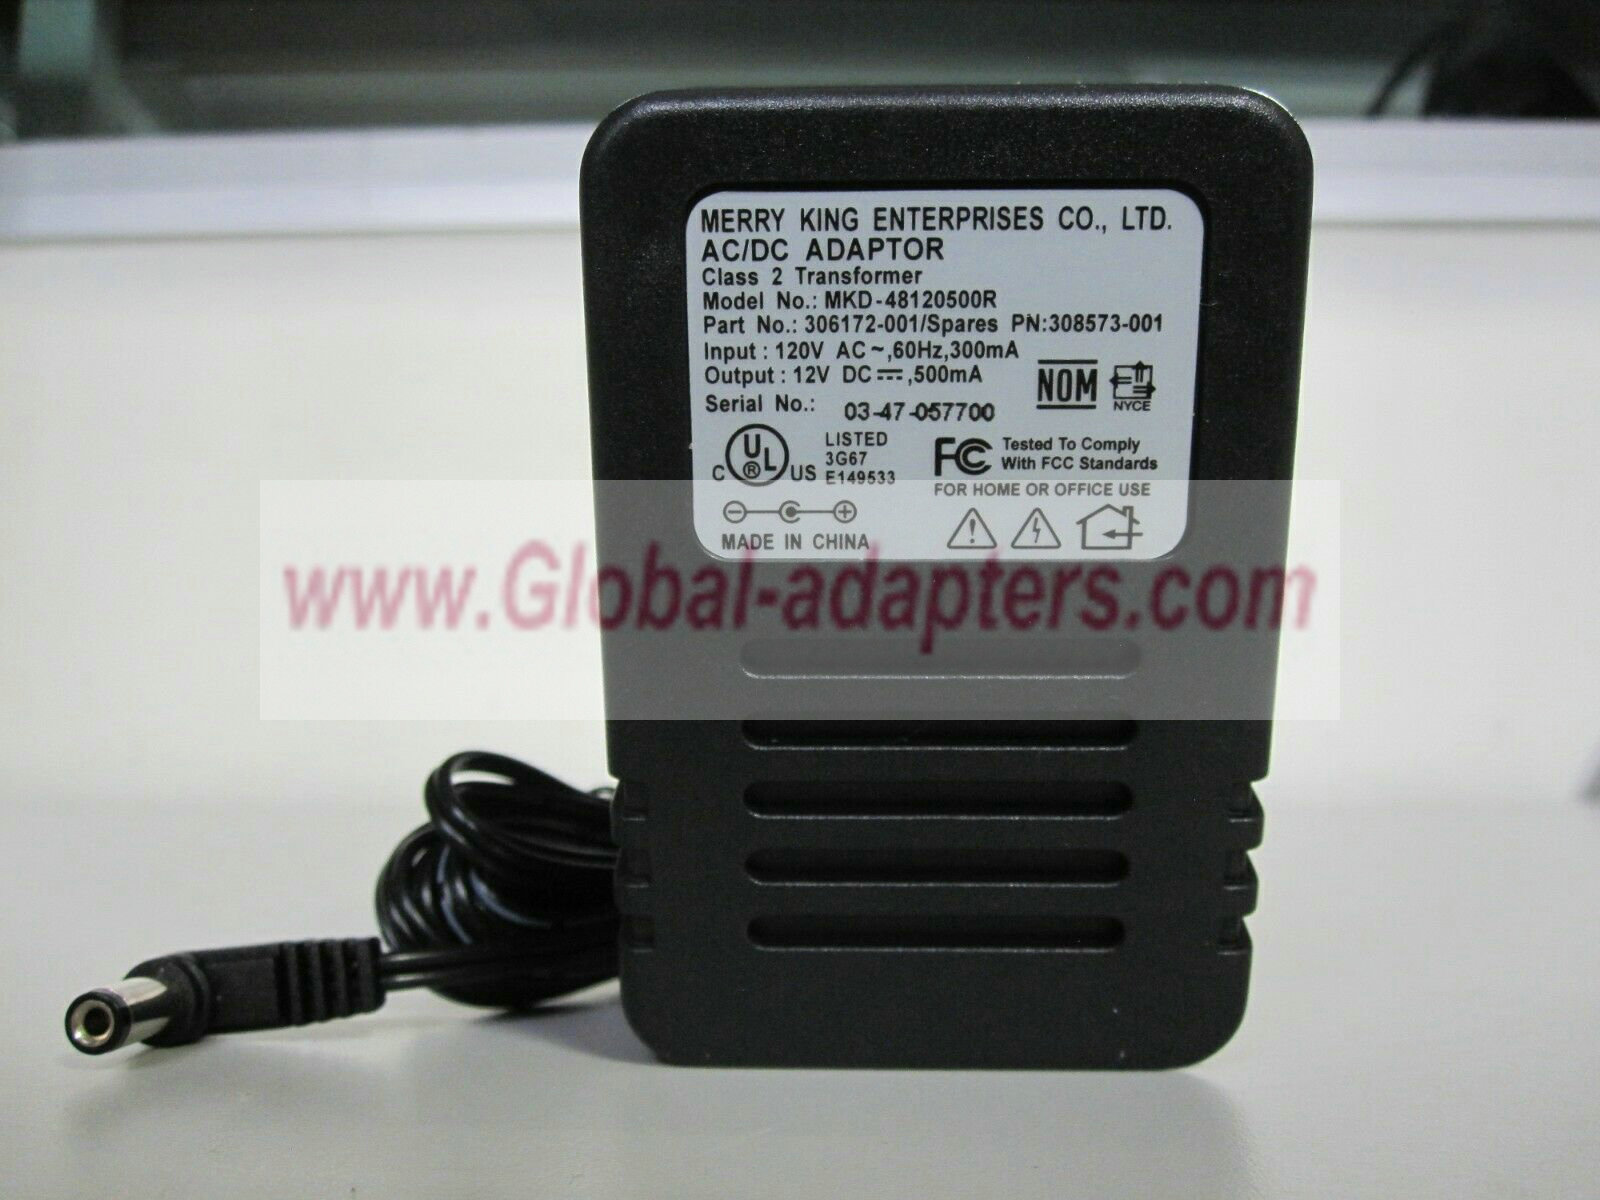 NEW 12V 500mA MERRY KING ENTERPRISES MKD-48120500R AC/DC ADAPTER - Click Image to Close